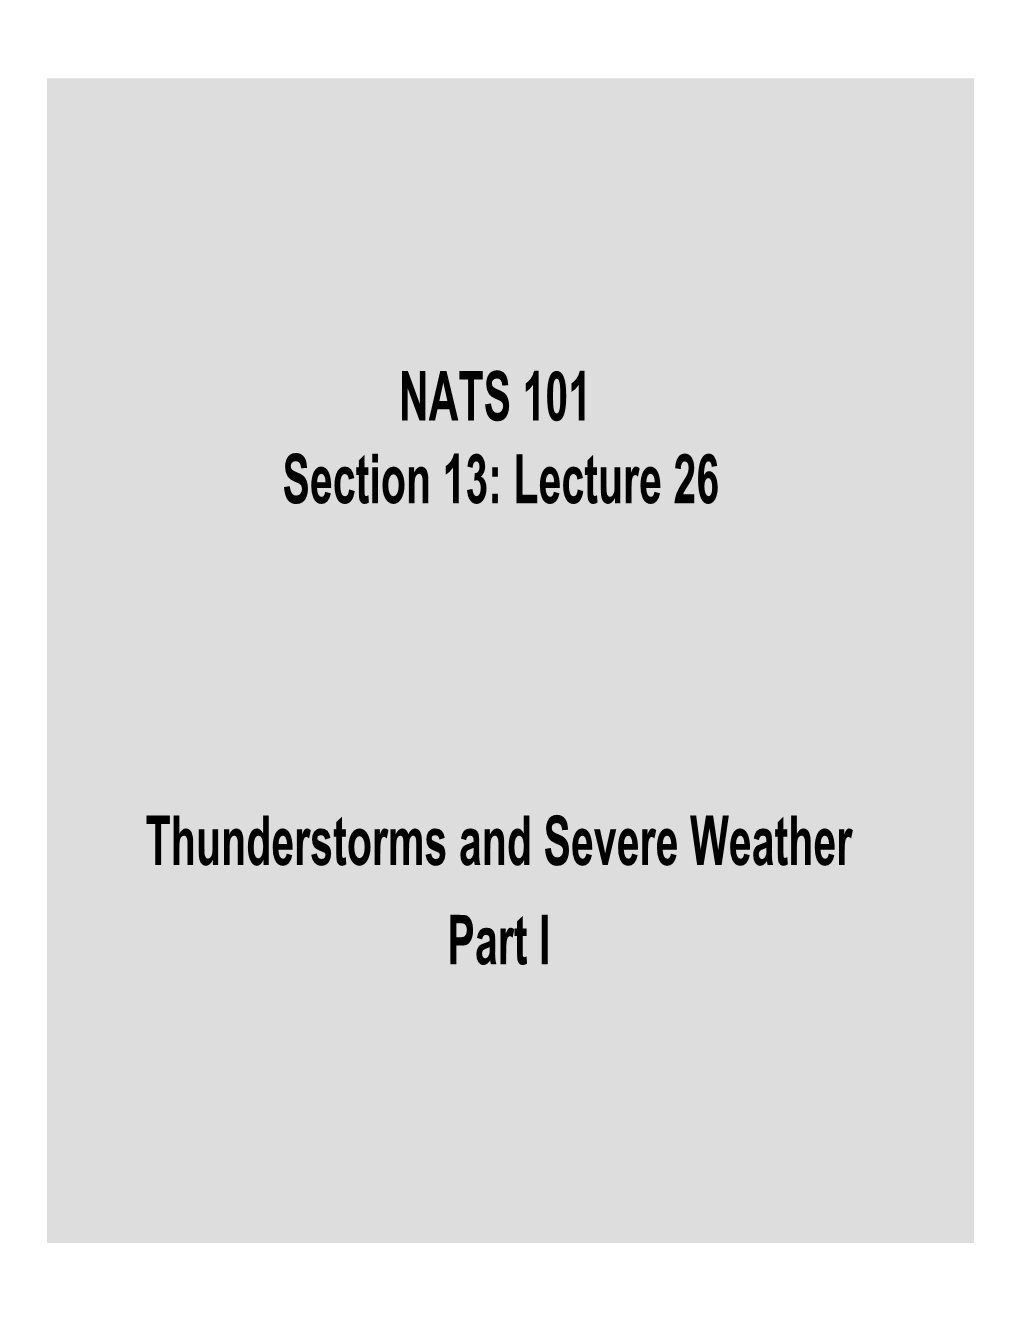 NATS 101 Section 13: Lecture 26 Thunderstorms and Severe Weather Part I